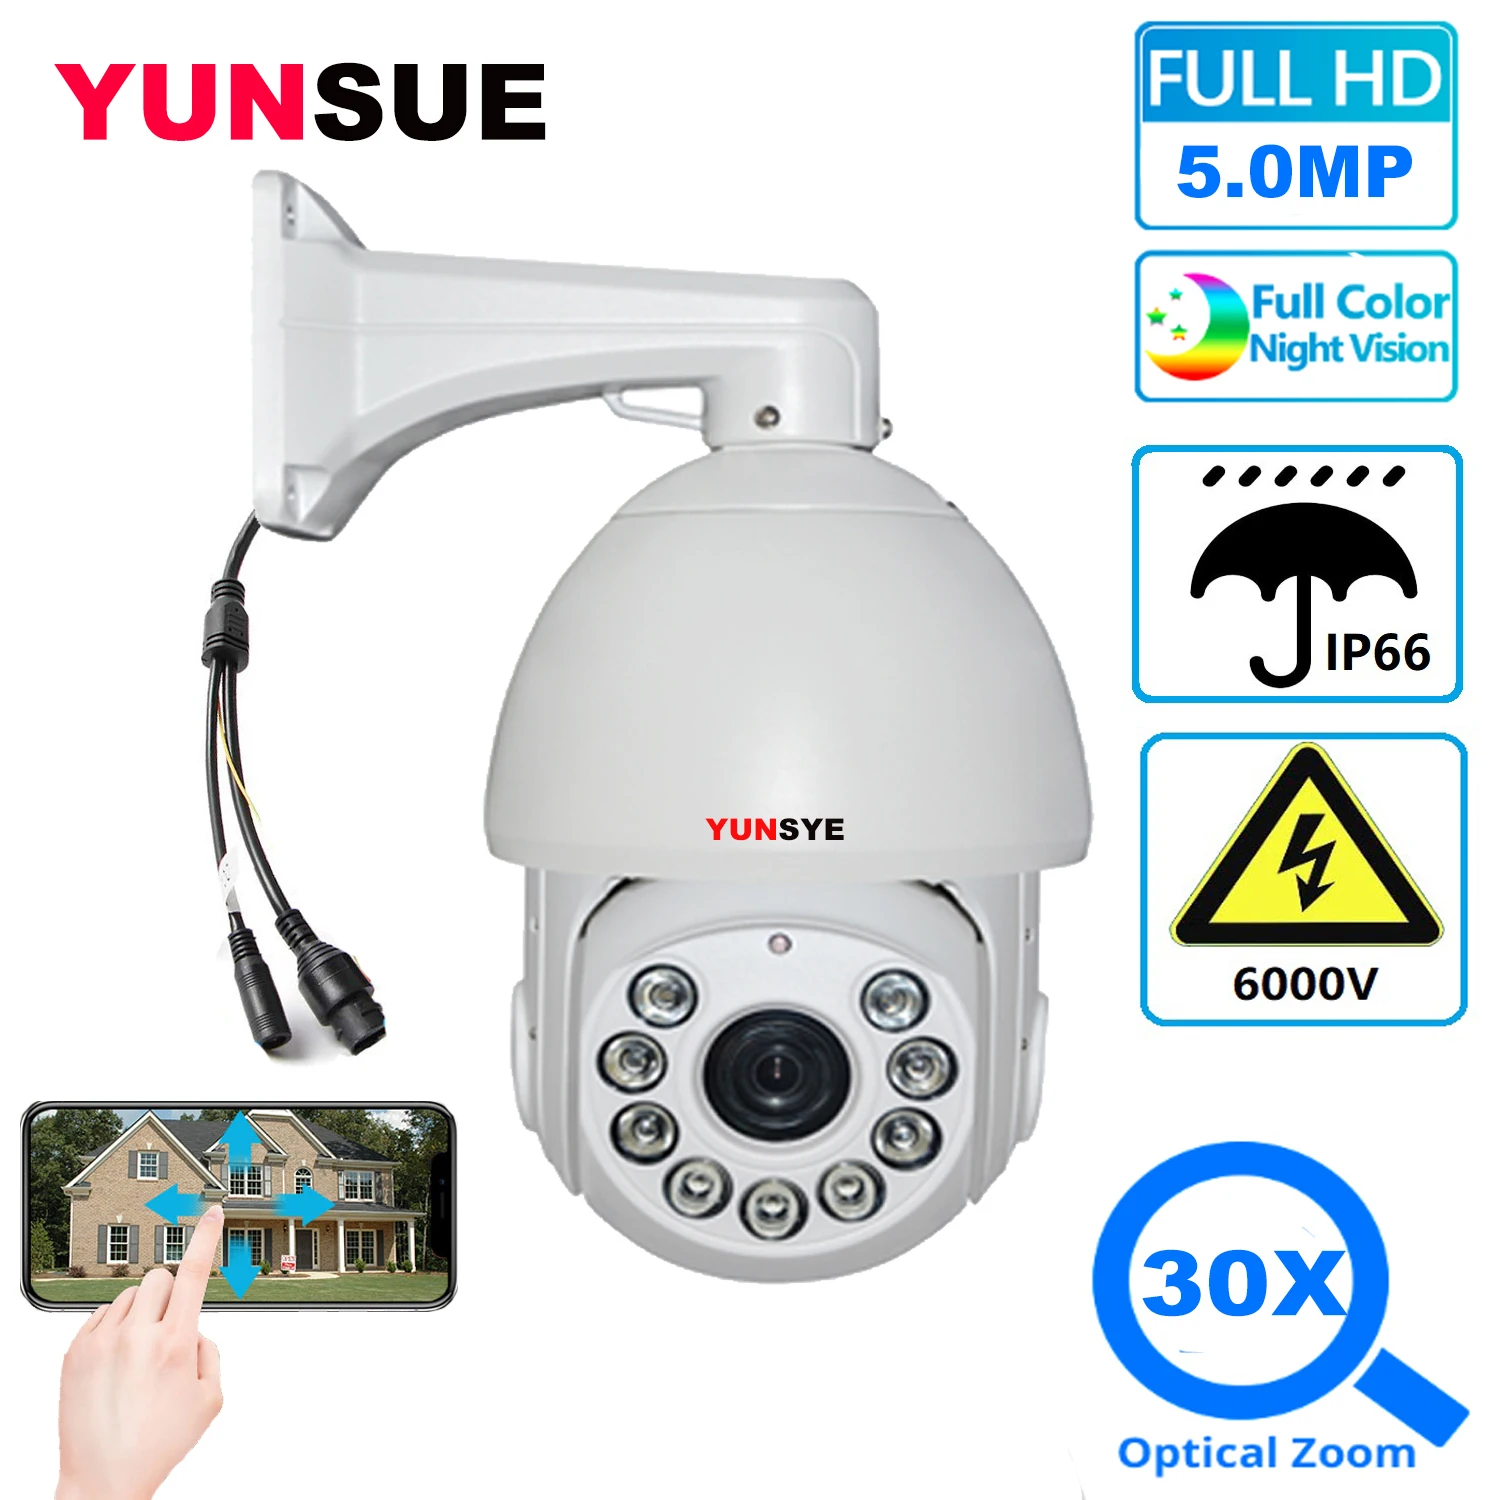 

YUNSYE 1080P 5MP 8MP Outdoor PTZ High Speed Dome 30X Zoom Infrared 150M IP Camera CCTV Surveillance Home Security Camera ONVIF